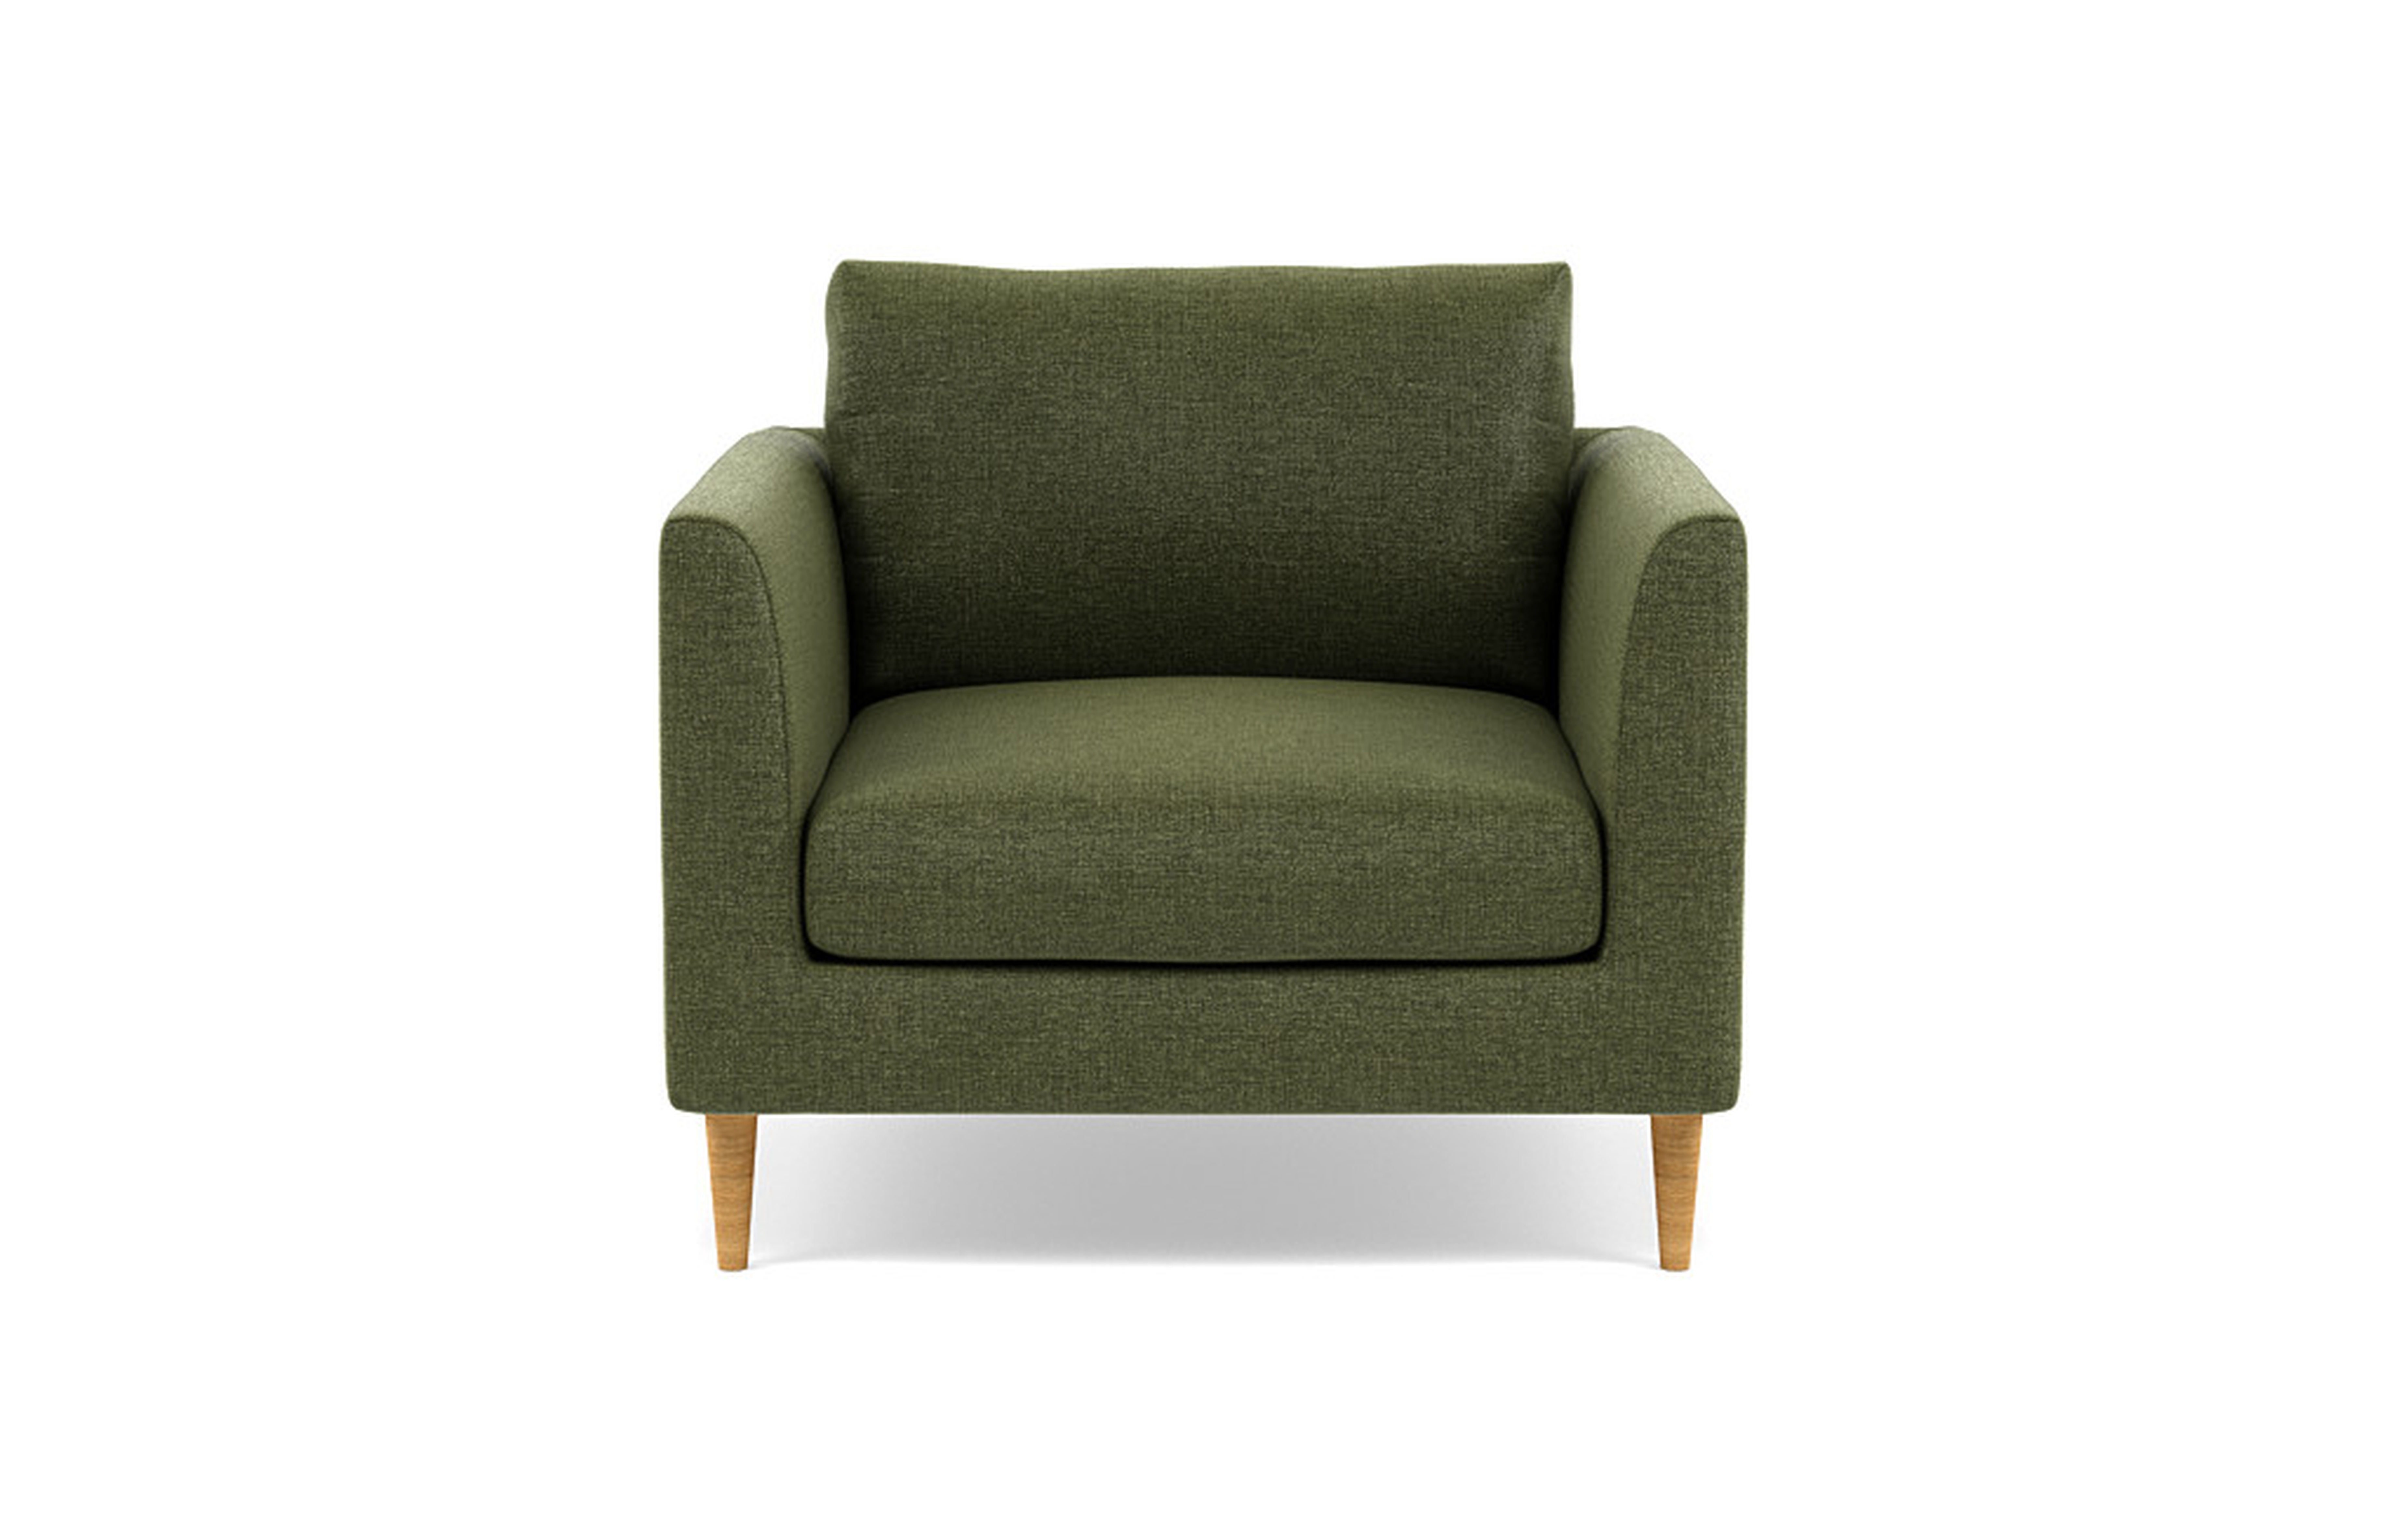 Owens Accent Chair with Olive Linen Performance Weave, Natural Oak Legs - Interior Define